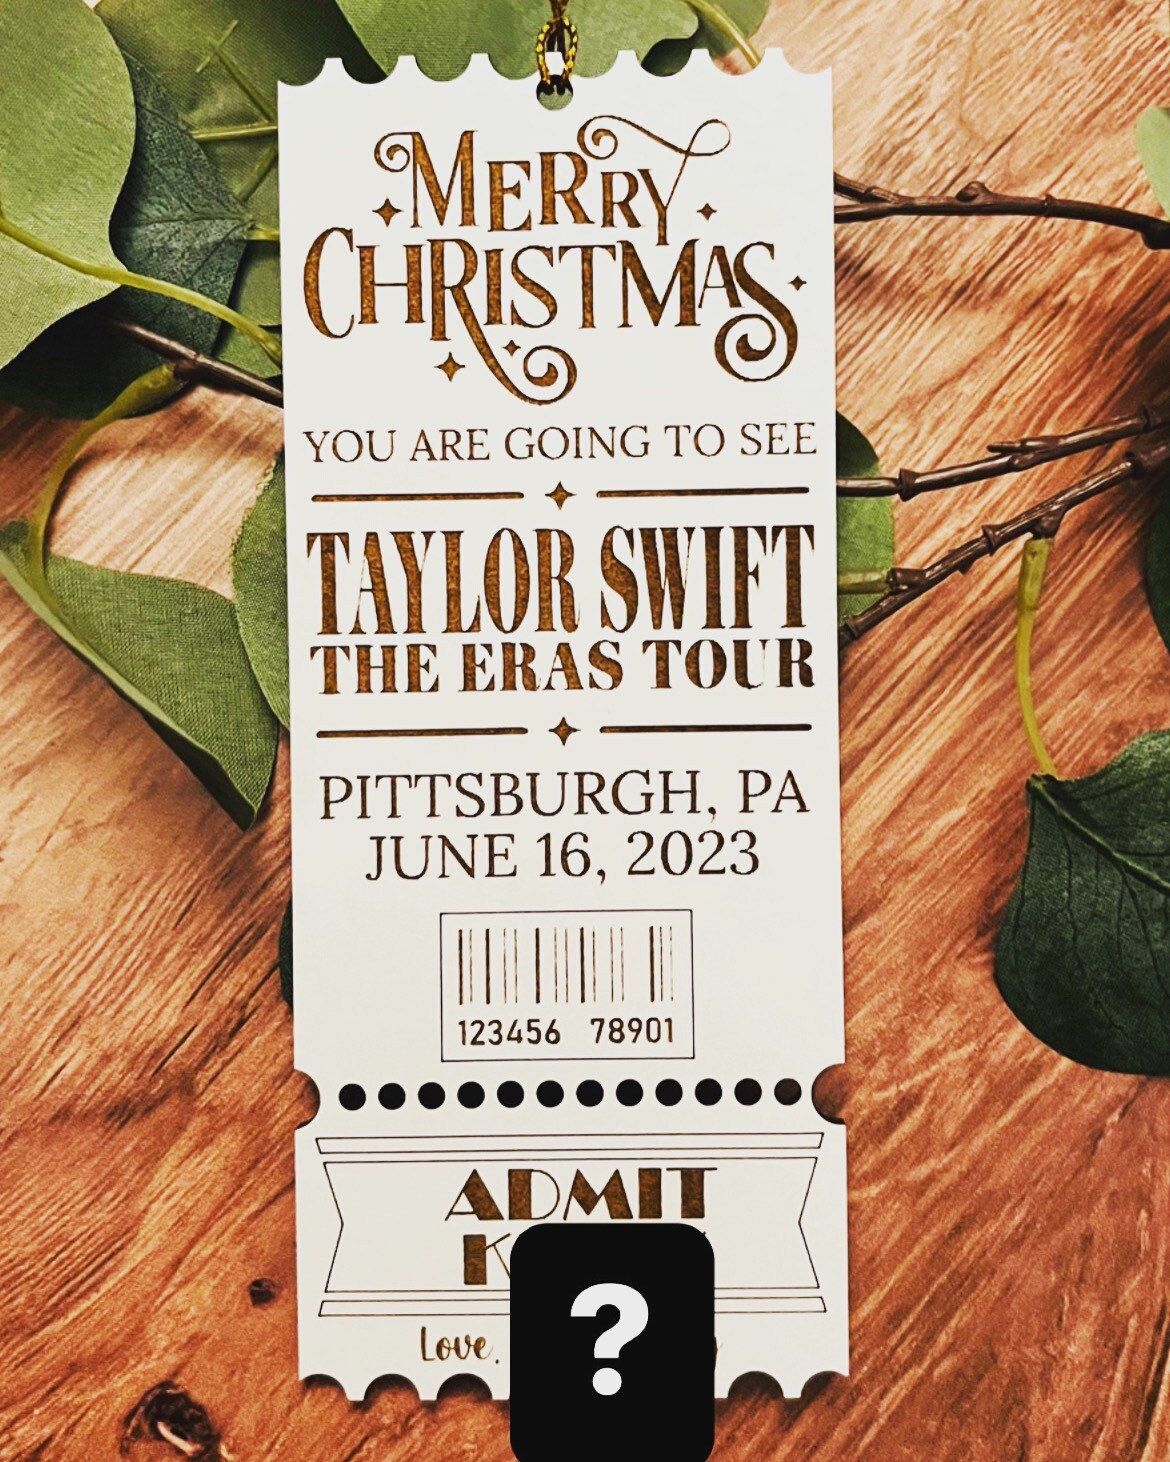 Taylor Swift Ticket DIGITAL Embroidery File, In The Hoop Bookmark,  Ornament, Gift Bag Tag, Eyelet